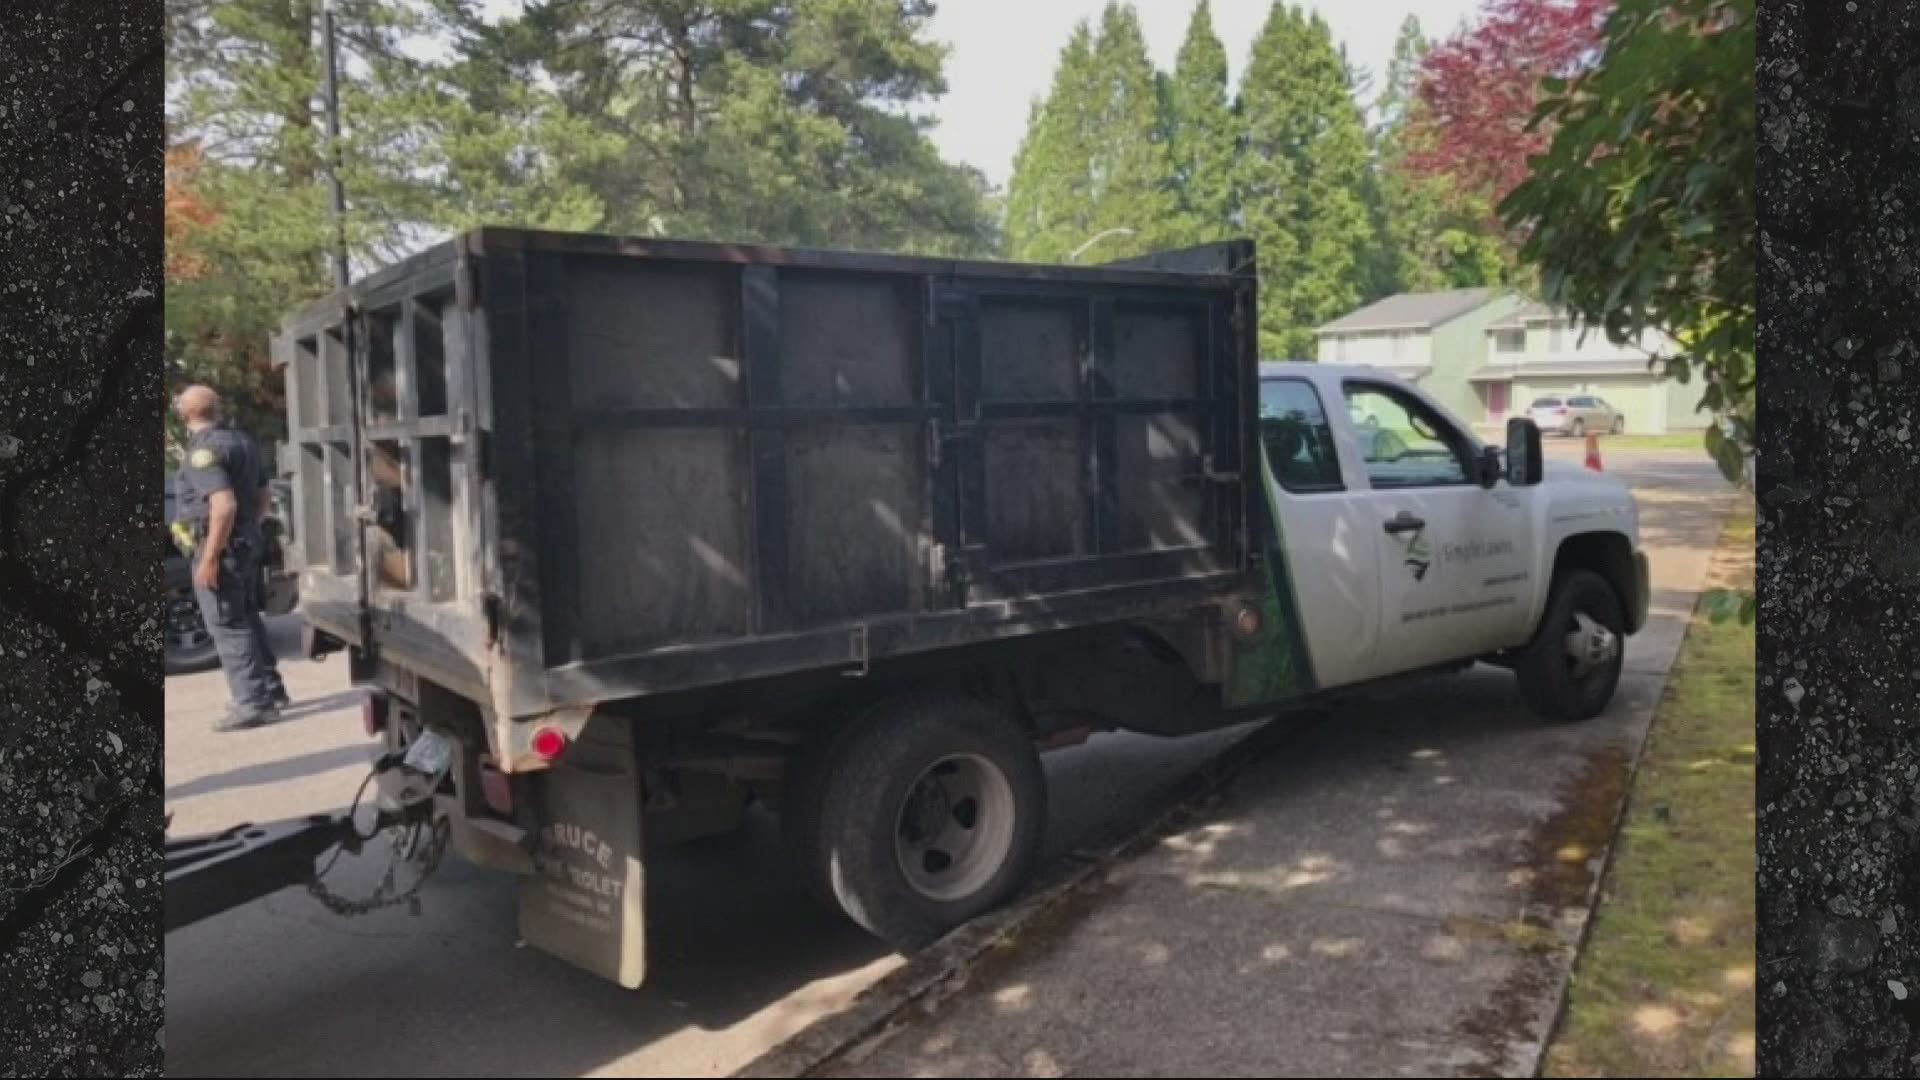 Portland police say Benjamin Hendricks drove into oncoming traffic and nearly hit two pedestrians in a stolen landscaping truck.